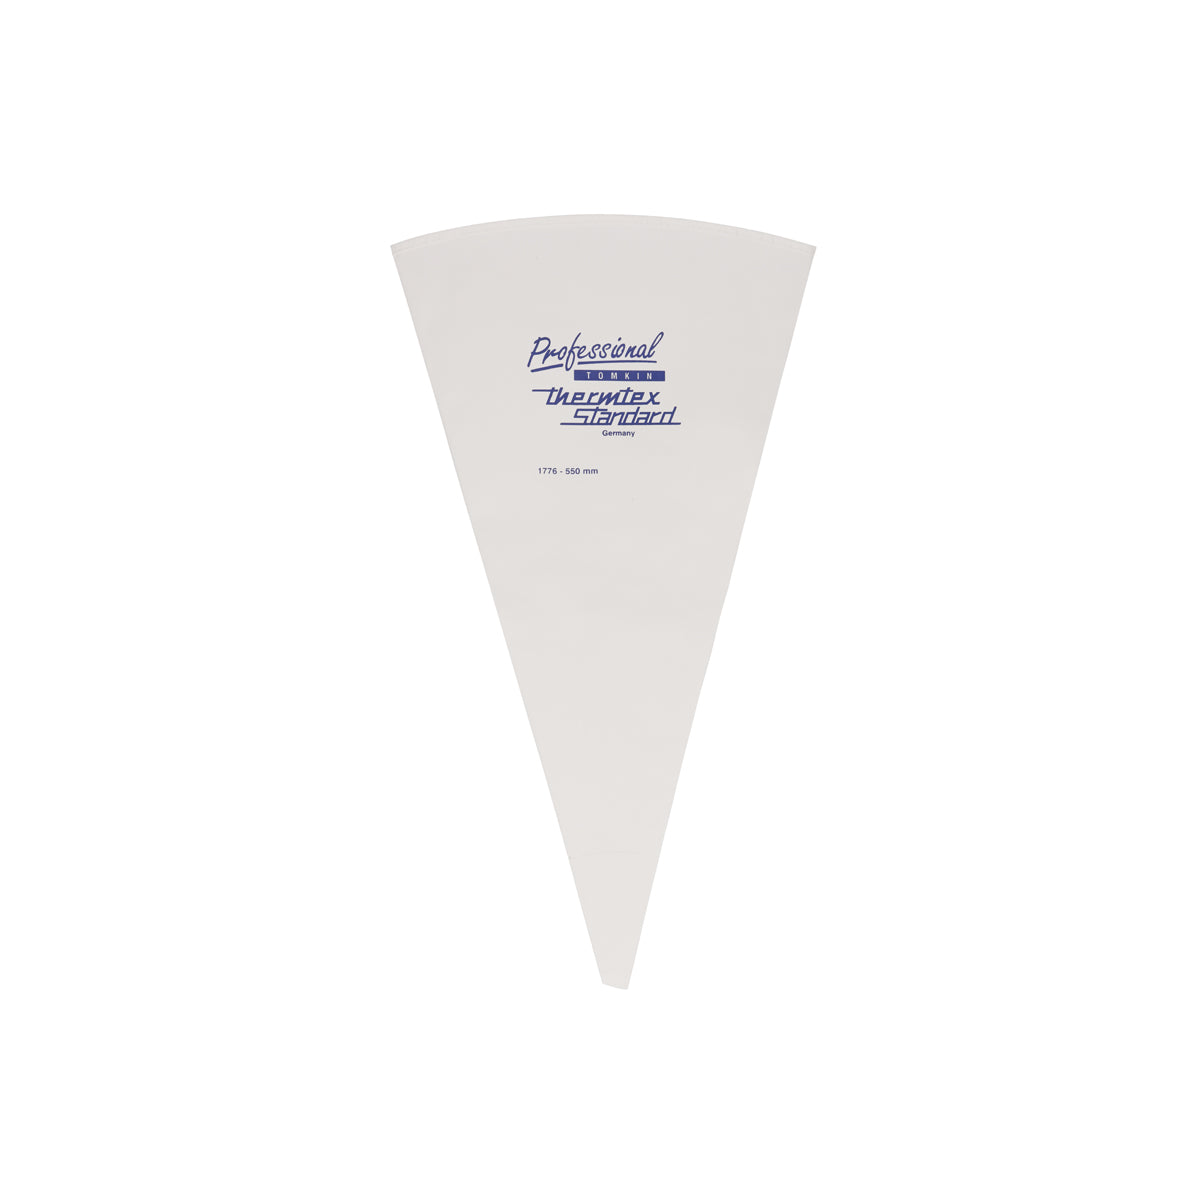 01776 Thermohauser Standard Pastry Bag 550mm Tomkin Australia Hospitality Supplies